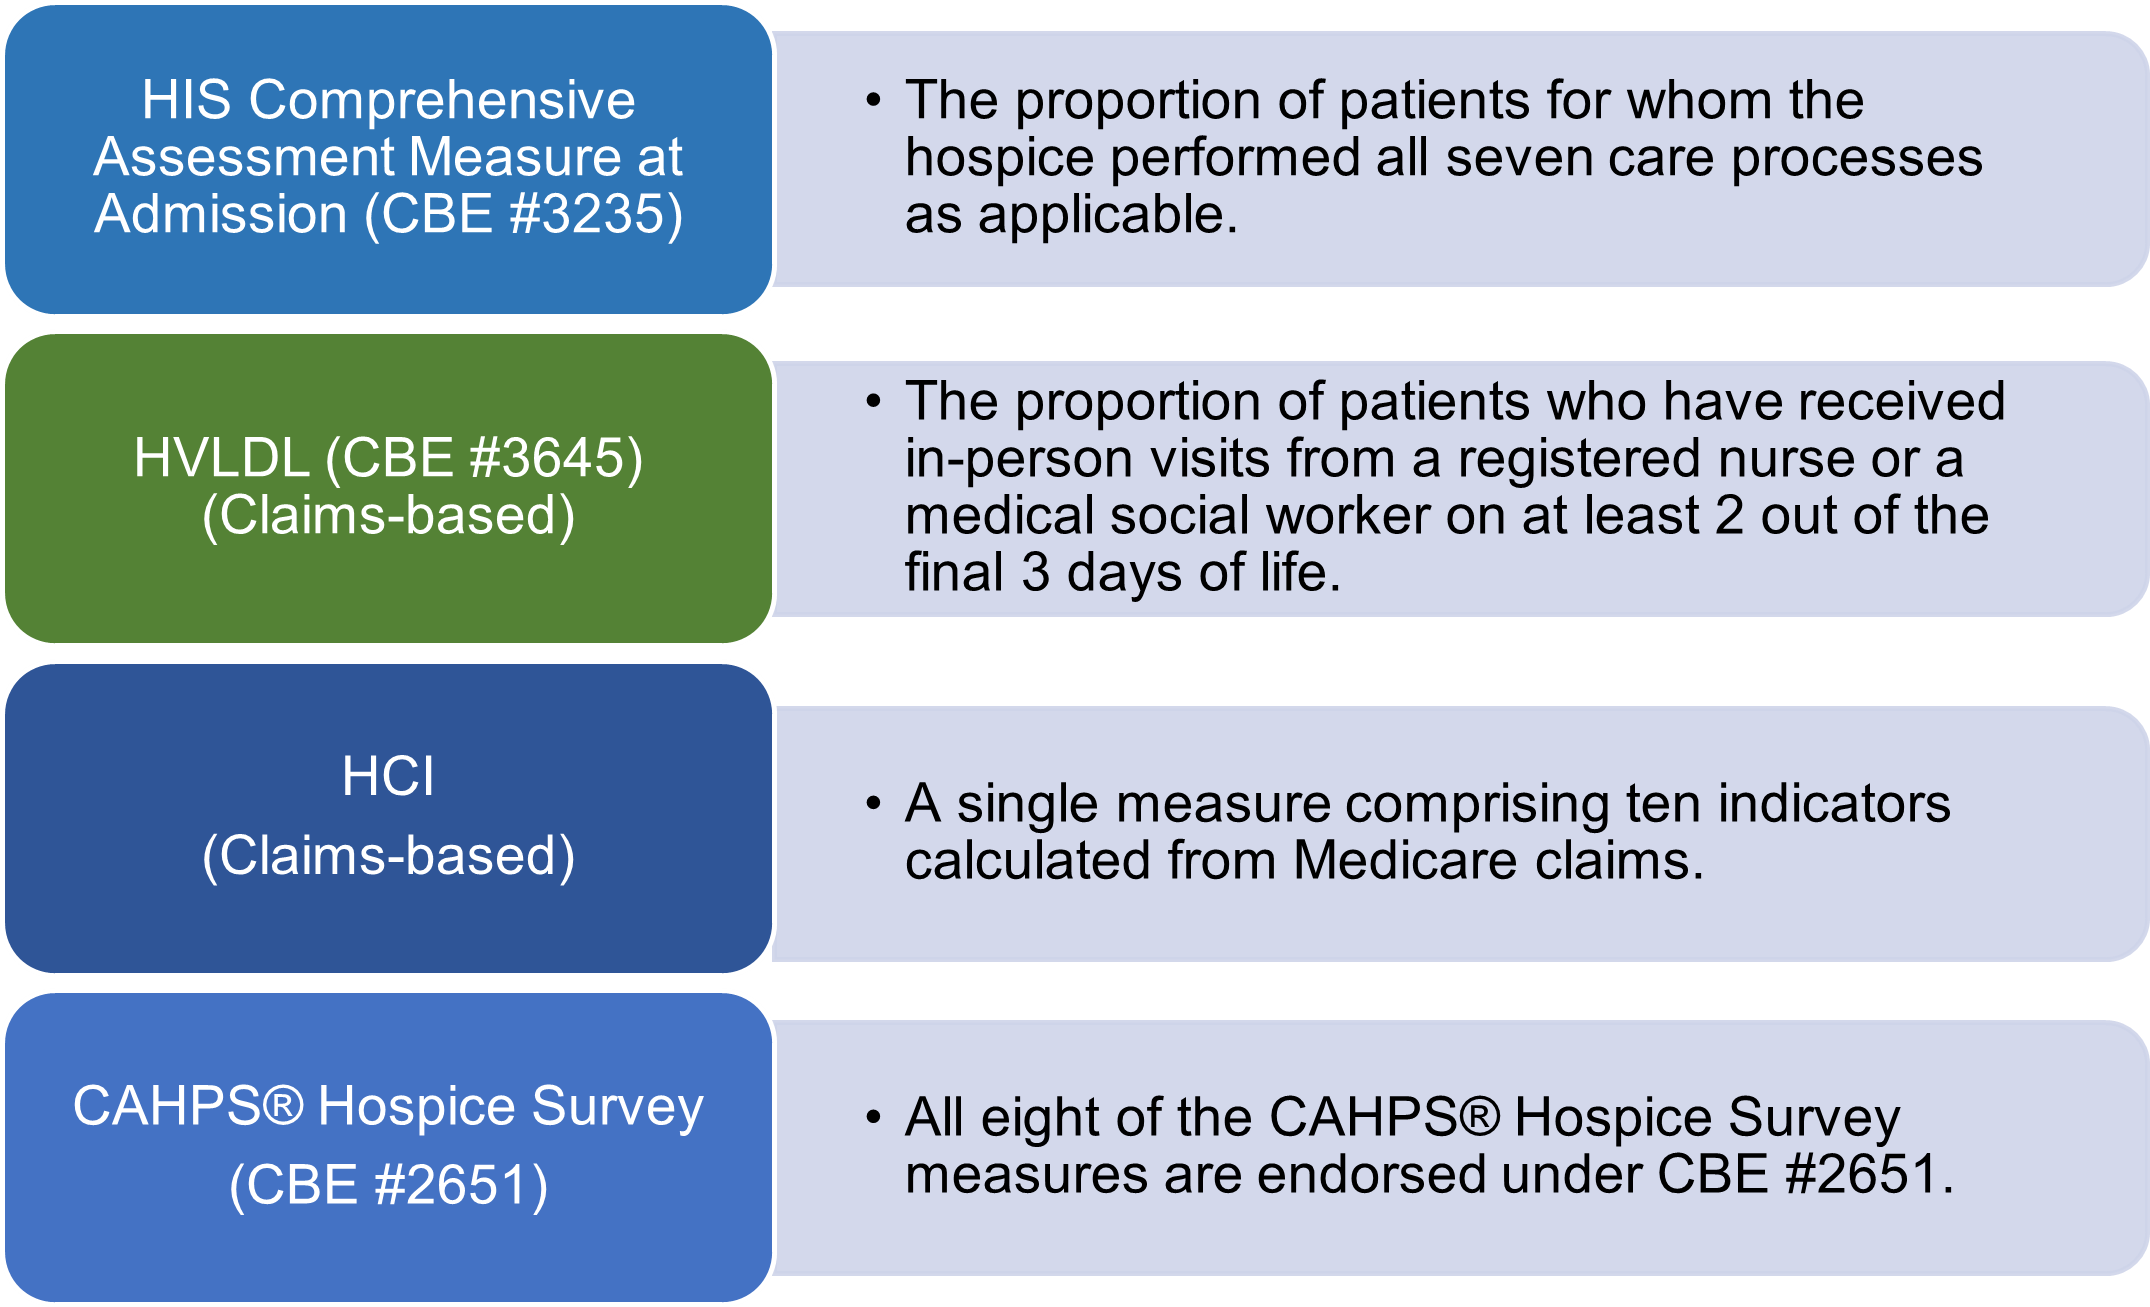 HIS Comprehensive Assessment Measure at Admission (CBE #3235) 	The proportion of patients for whom the hospice performed all seven care processes as applicable.  HVLDL (CBE #3645)                     (Claims-based)  	The proportion of patients who have received in-person visits from a registered nurse or a medical social worker on at least 2 out of the final 3 days of life. HCI  (Claims-based) 	A single measure comprising ten indicators calculated from Medicare claims.   CAHPS® Hospice Survey  (CBE #2651) 	